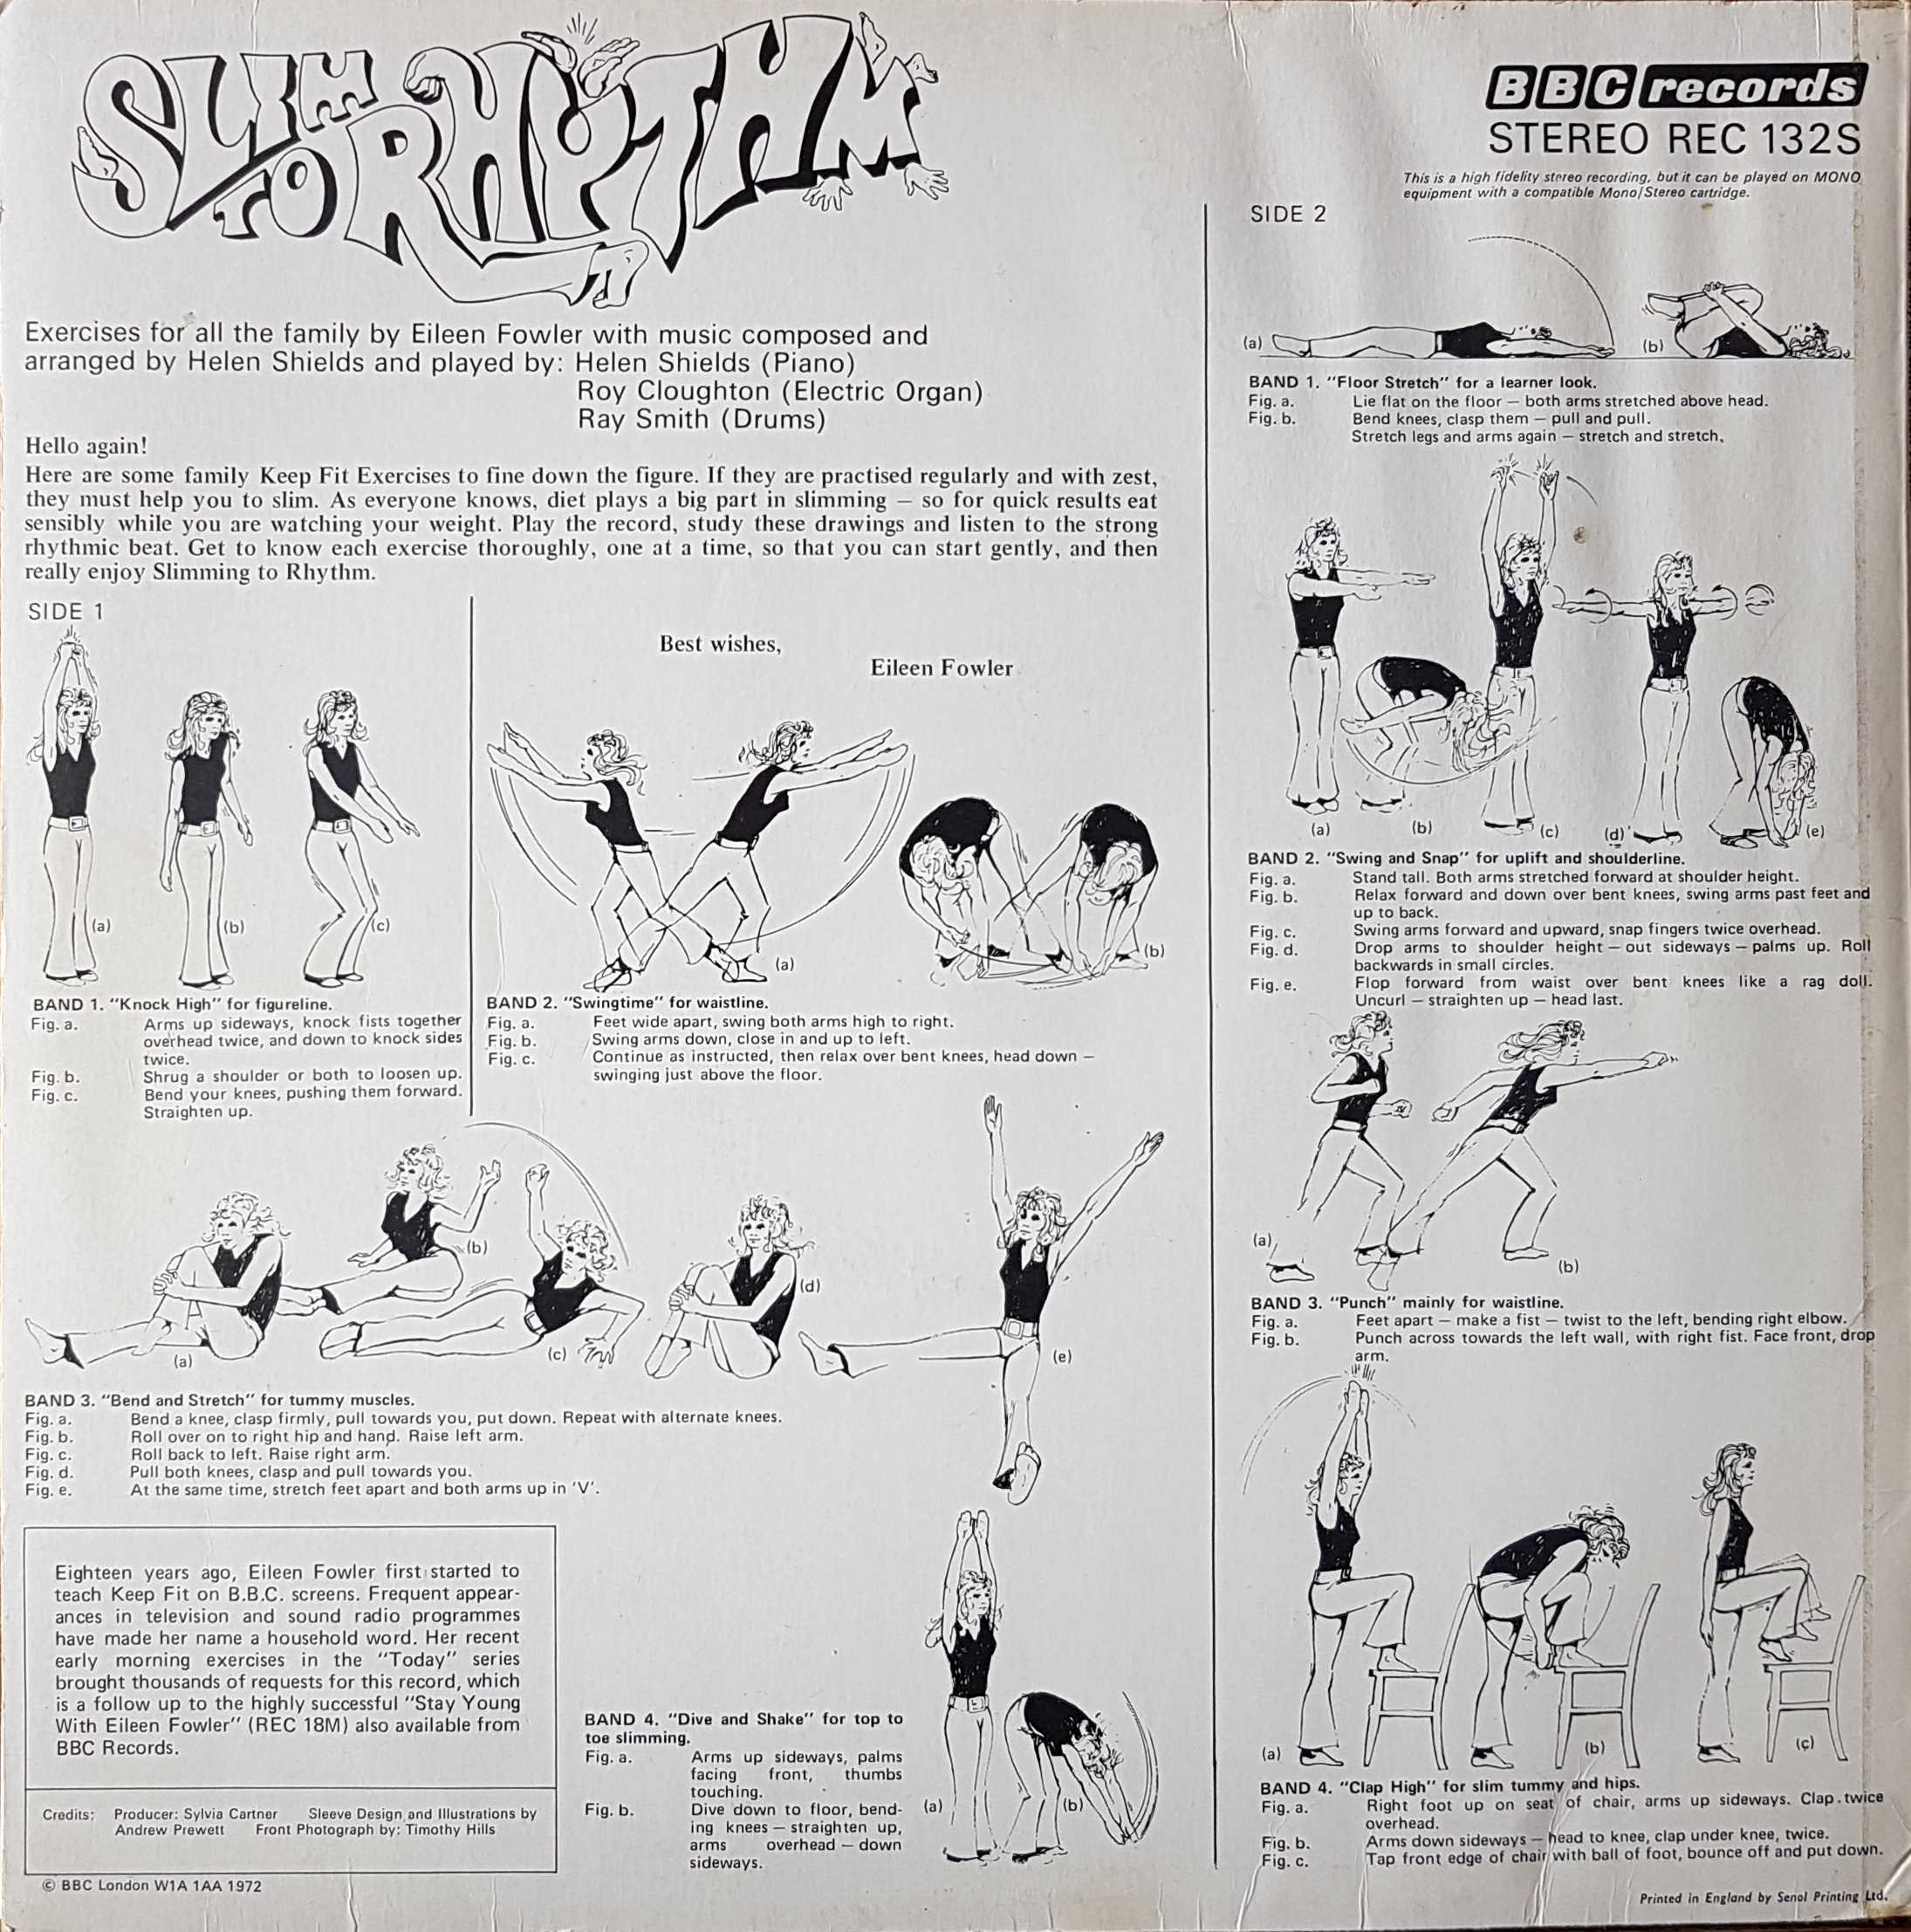 Picture of REC 132 Slim to rhythm by artist Eileen Fowler from the BBC records and Tapes library